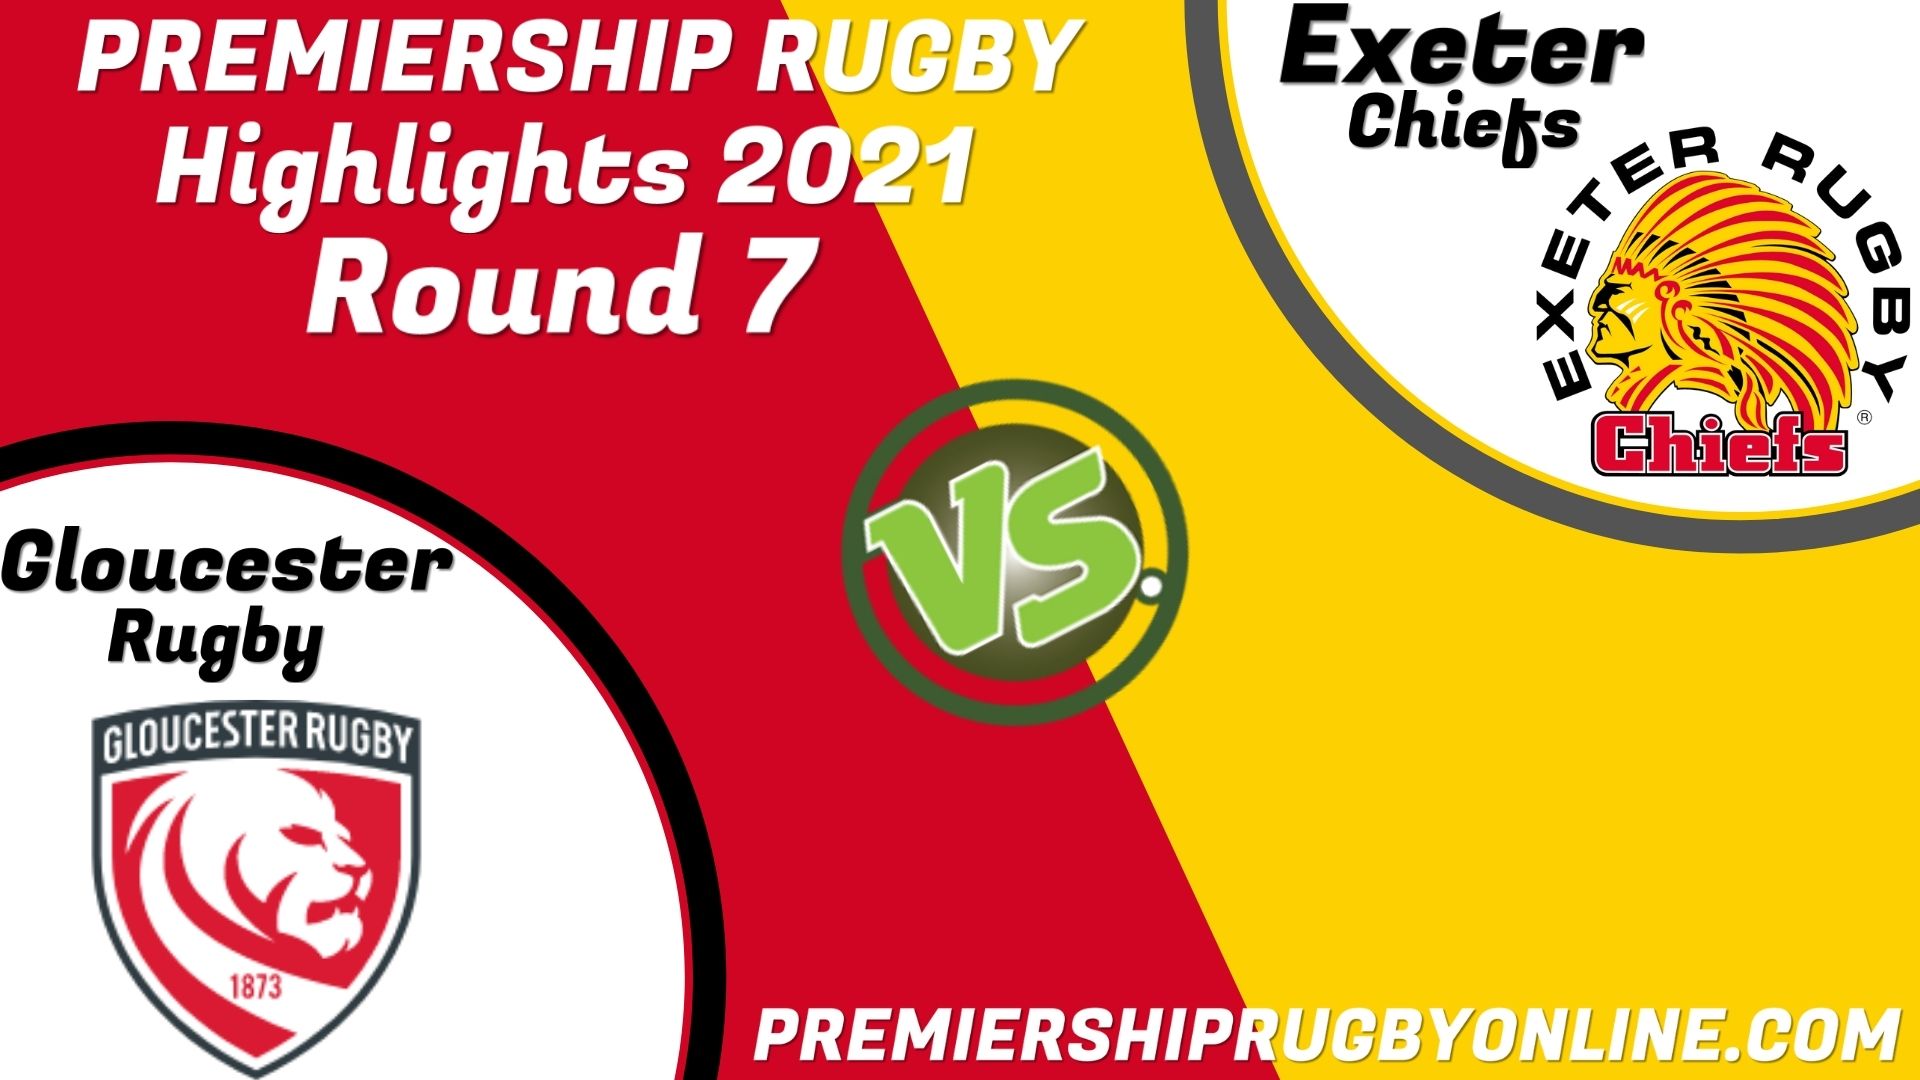 Gloucester Rugby Vs Exeter Chiefs Highlights 2021 RD 7